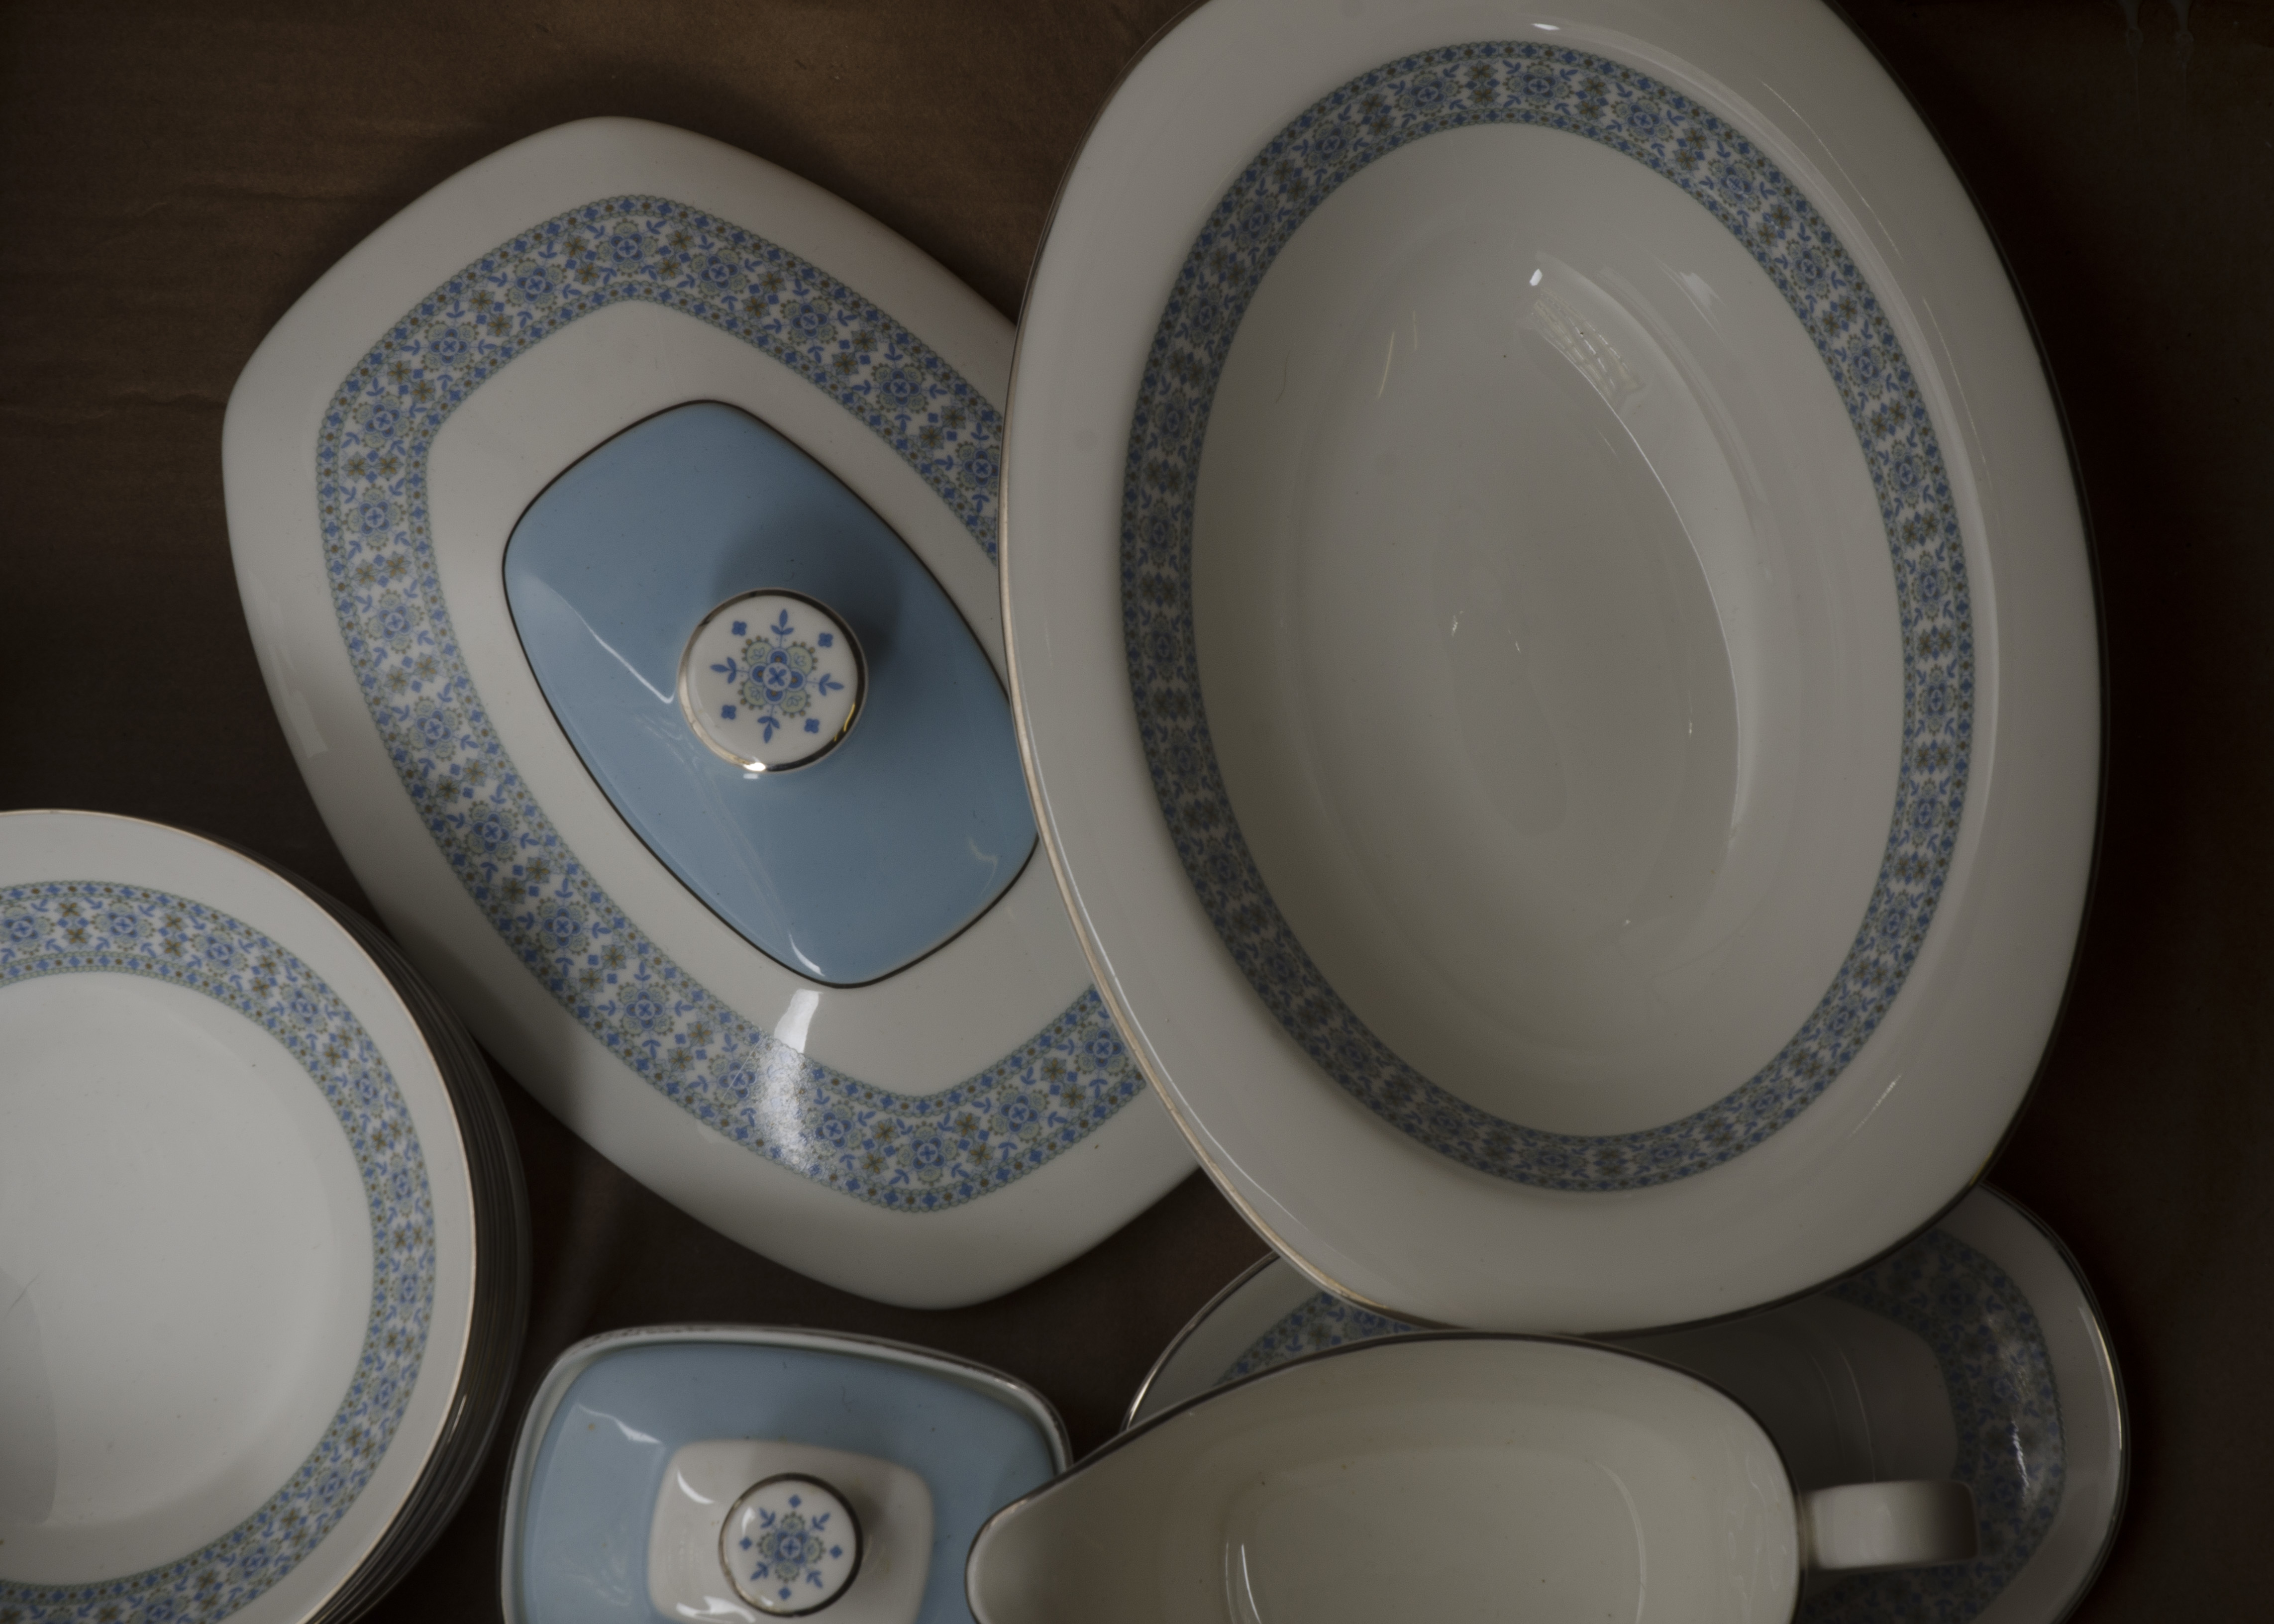 Royal Doulton Counterpoint Design Tea and Dinner Service, a floral decorated service including - Image 3 of 3